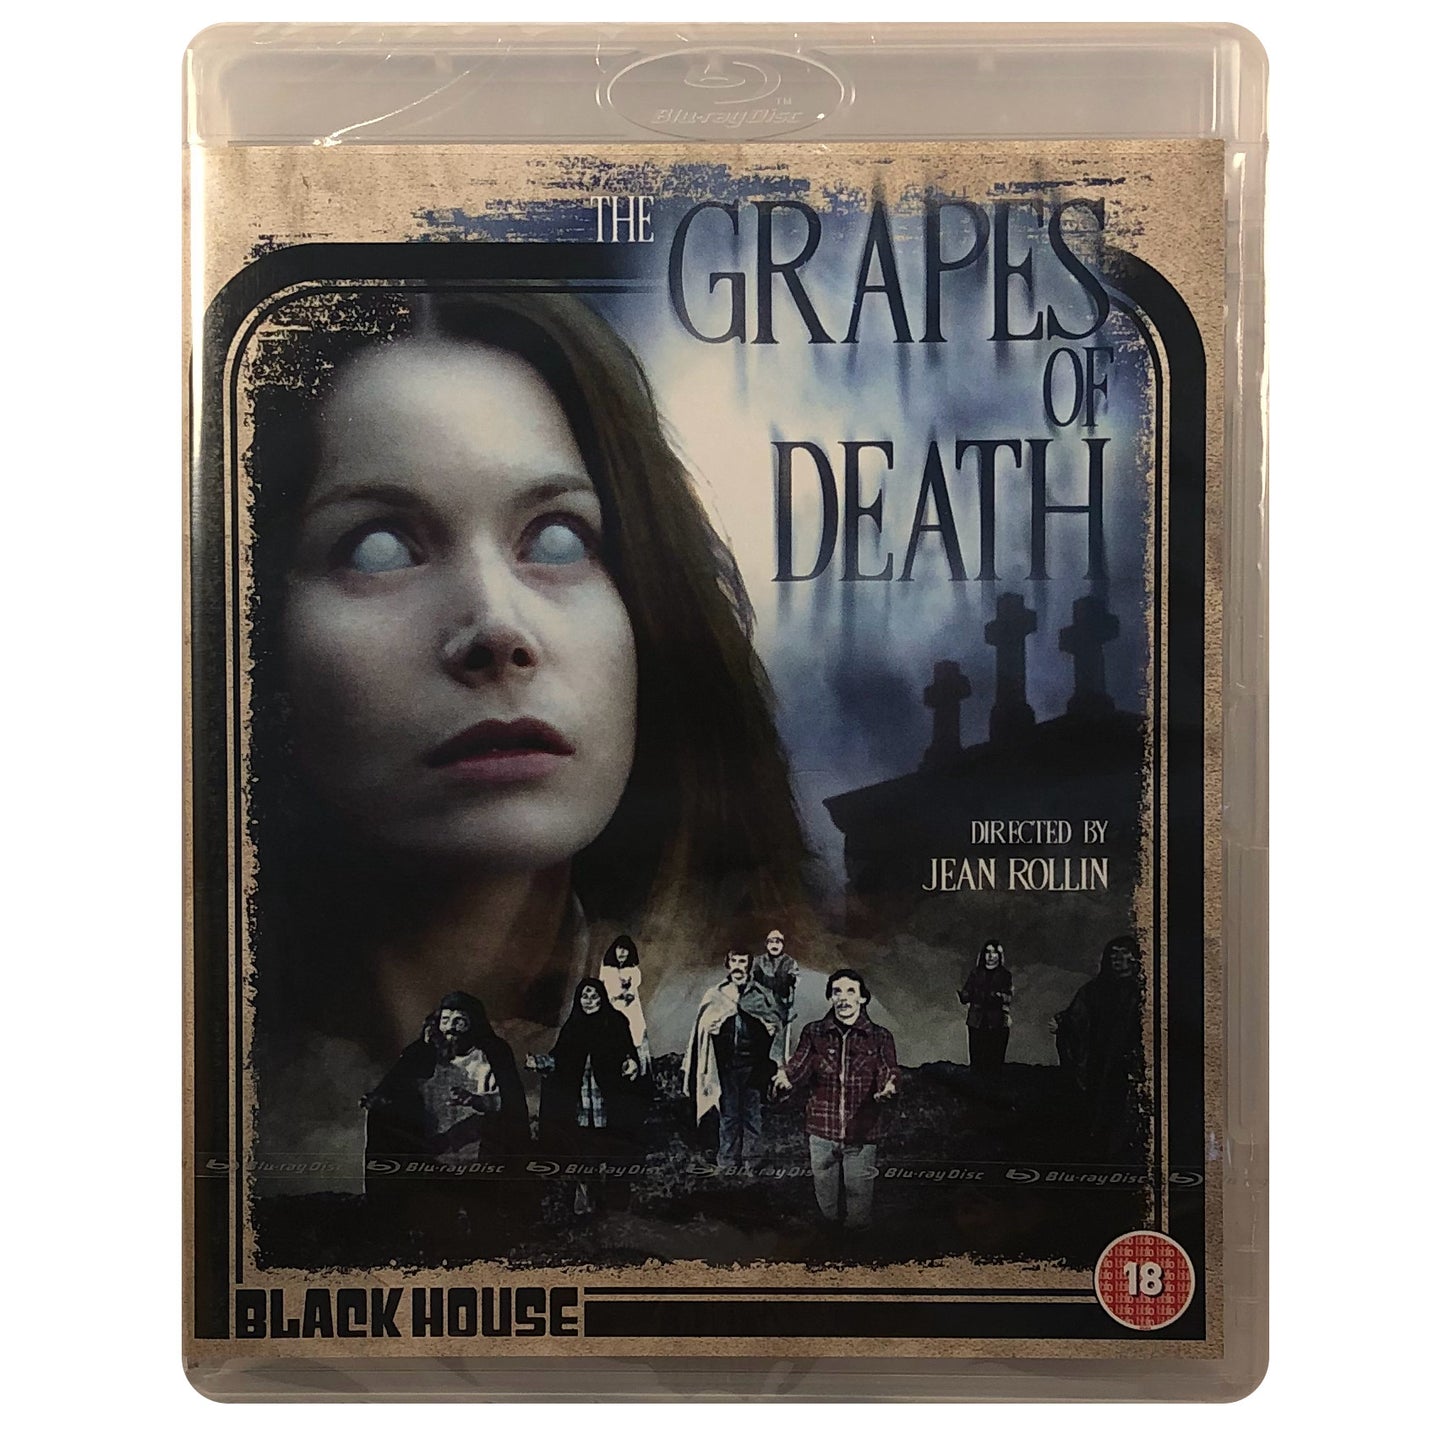 The Grapes of Death Blu-Ray